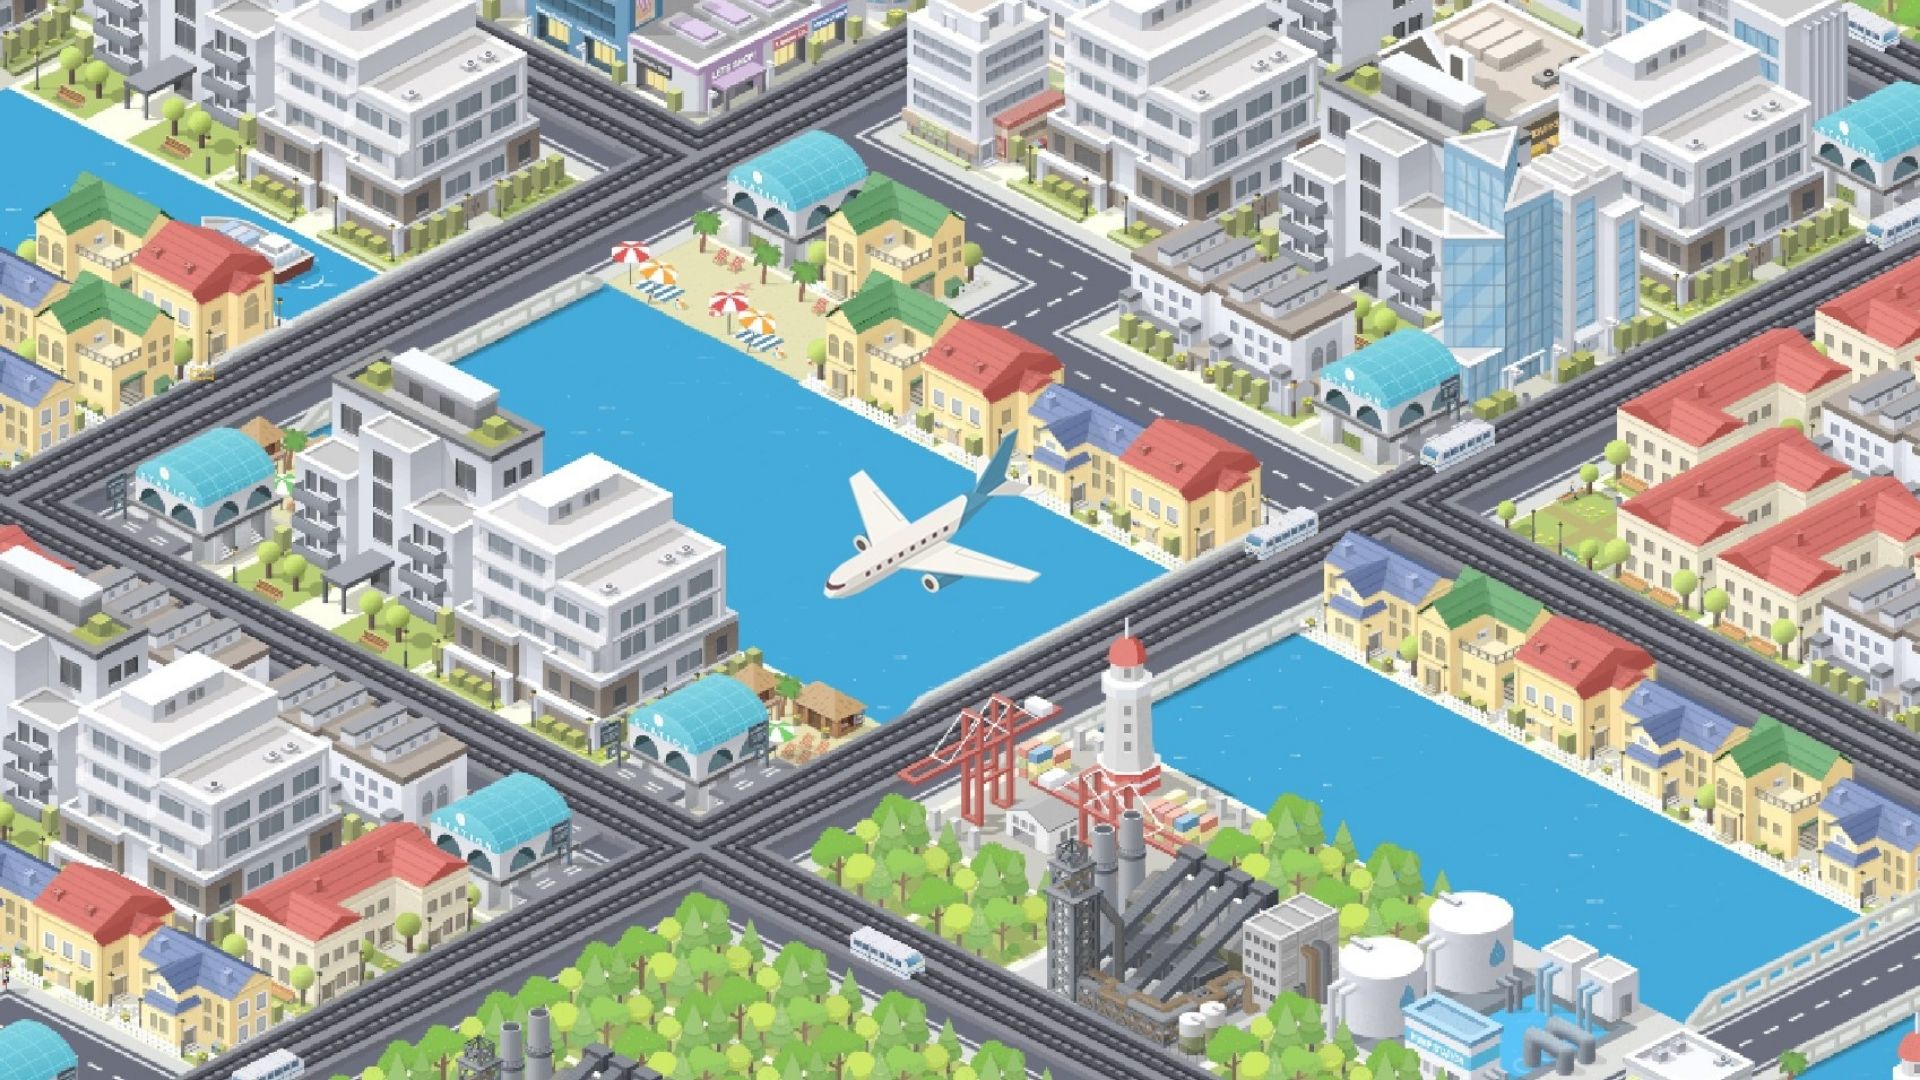 Best city-building games: Pocket City. Image shows a plane flying over an isometric cityscape.